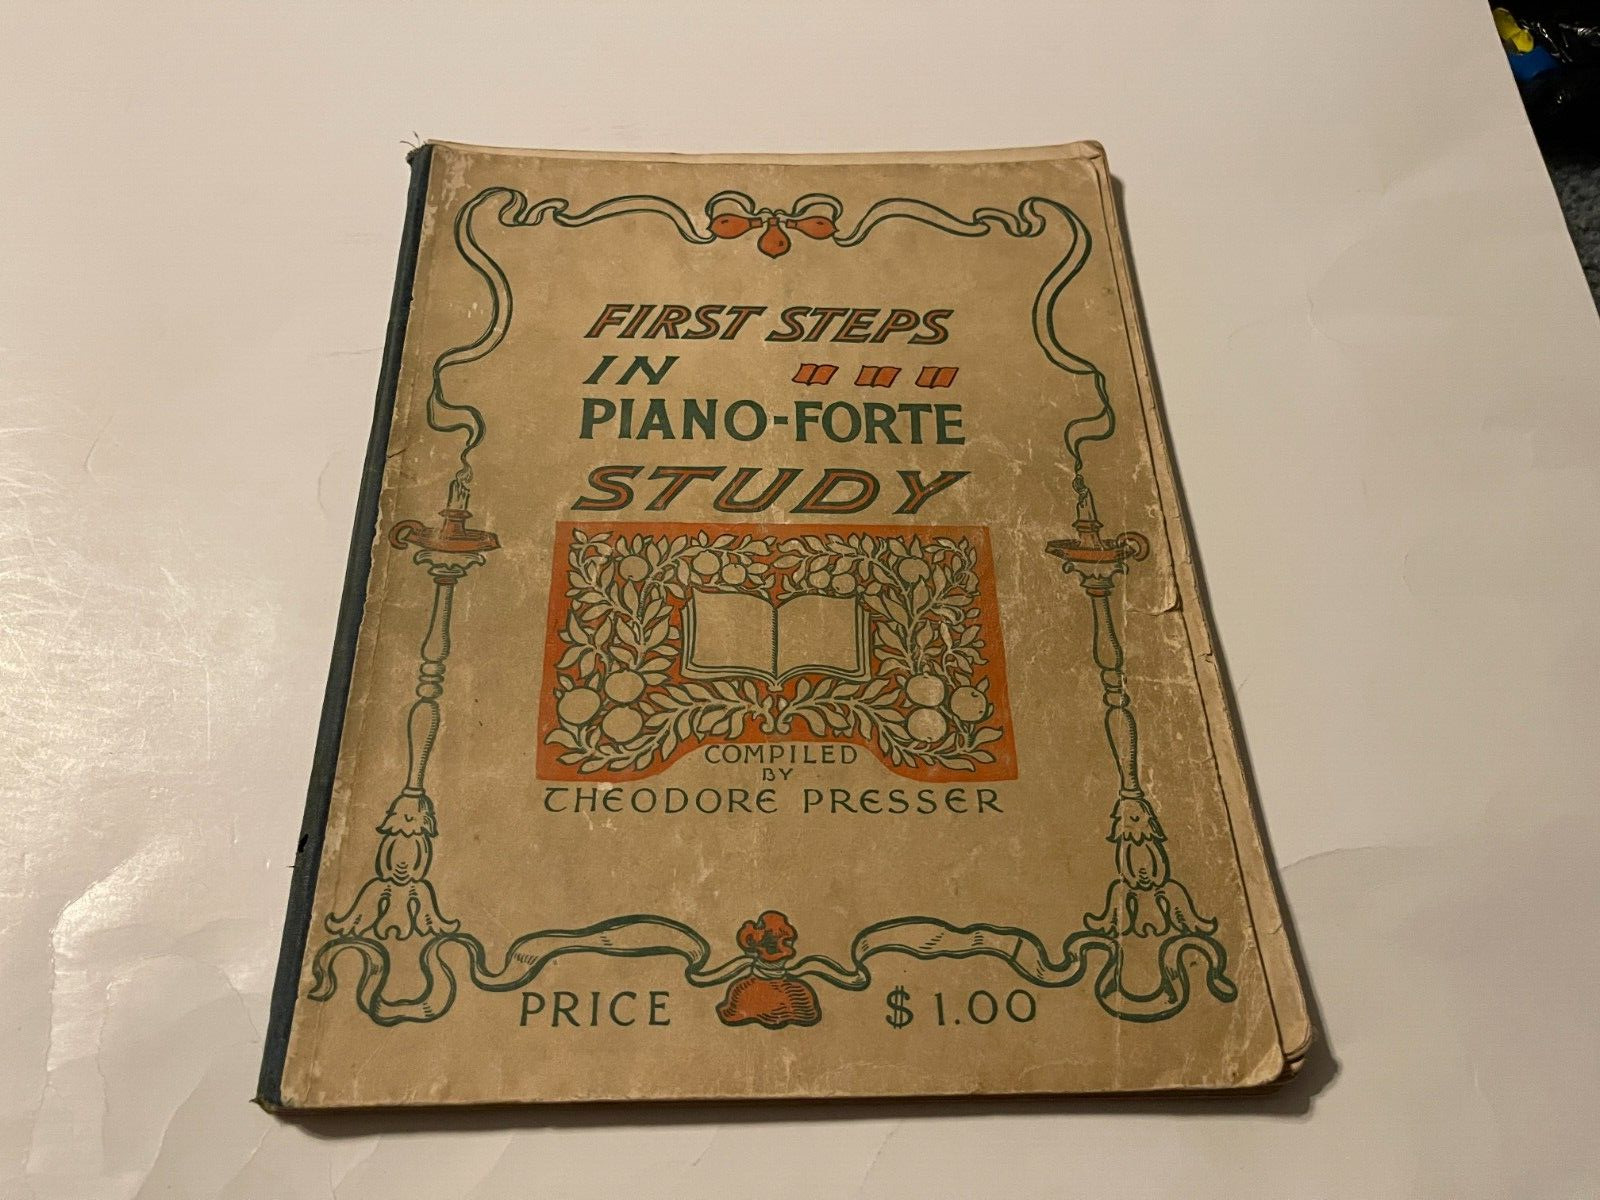 RARE 1900 Antique “First Steps In Piano-Forte Study” Piano Music Book